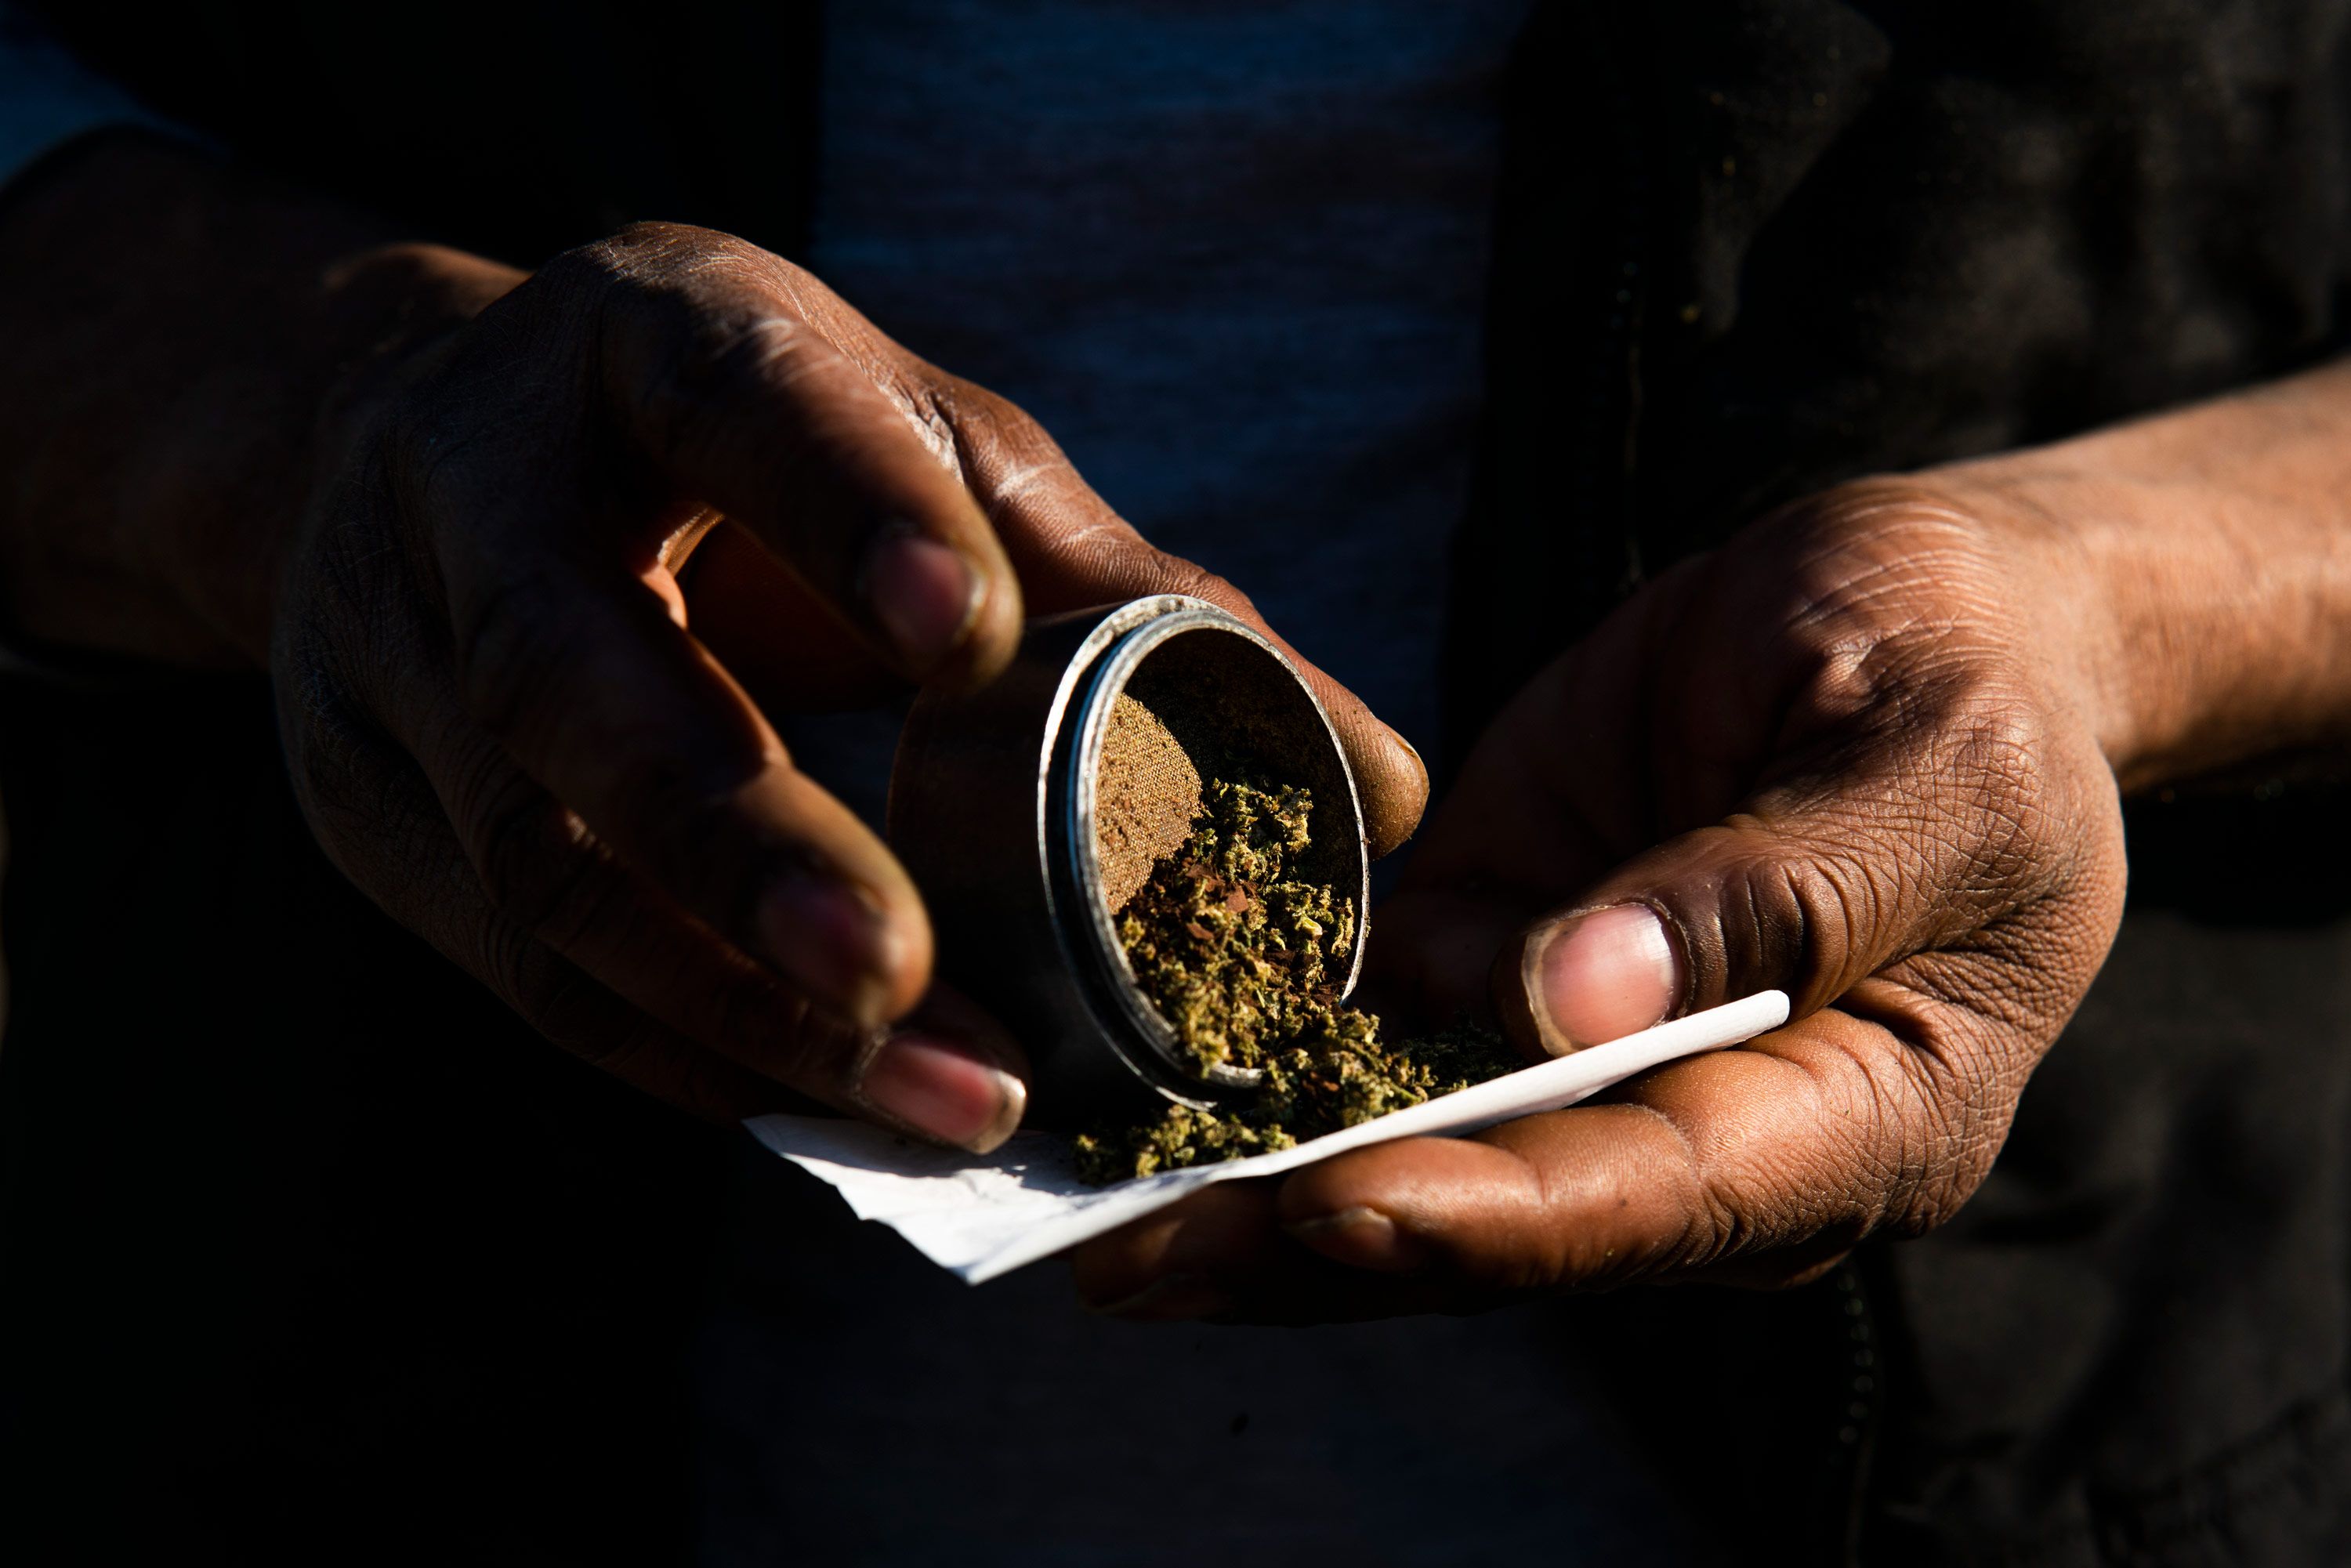 NYC Weed Dealers' Choice: Go Corporate or Stay Underground?